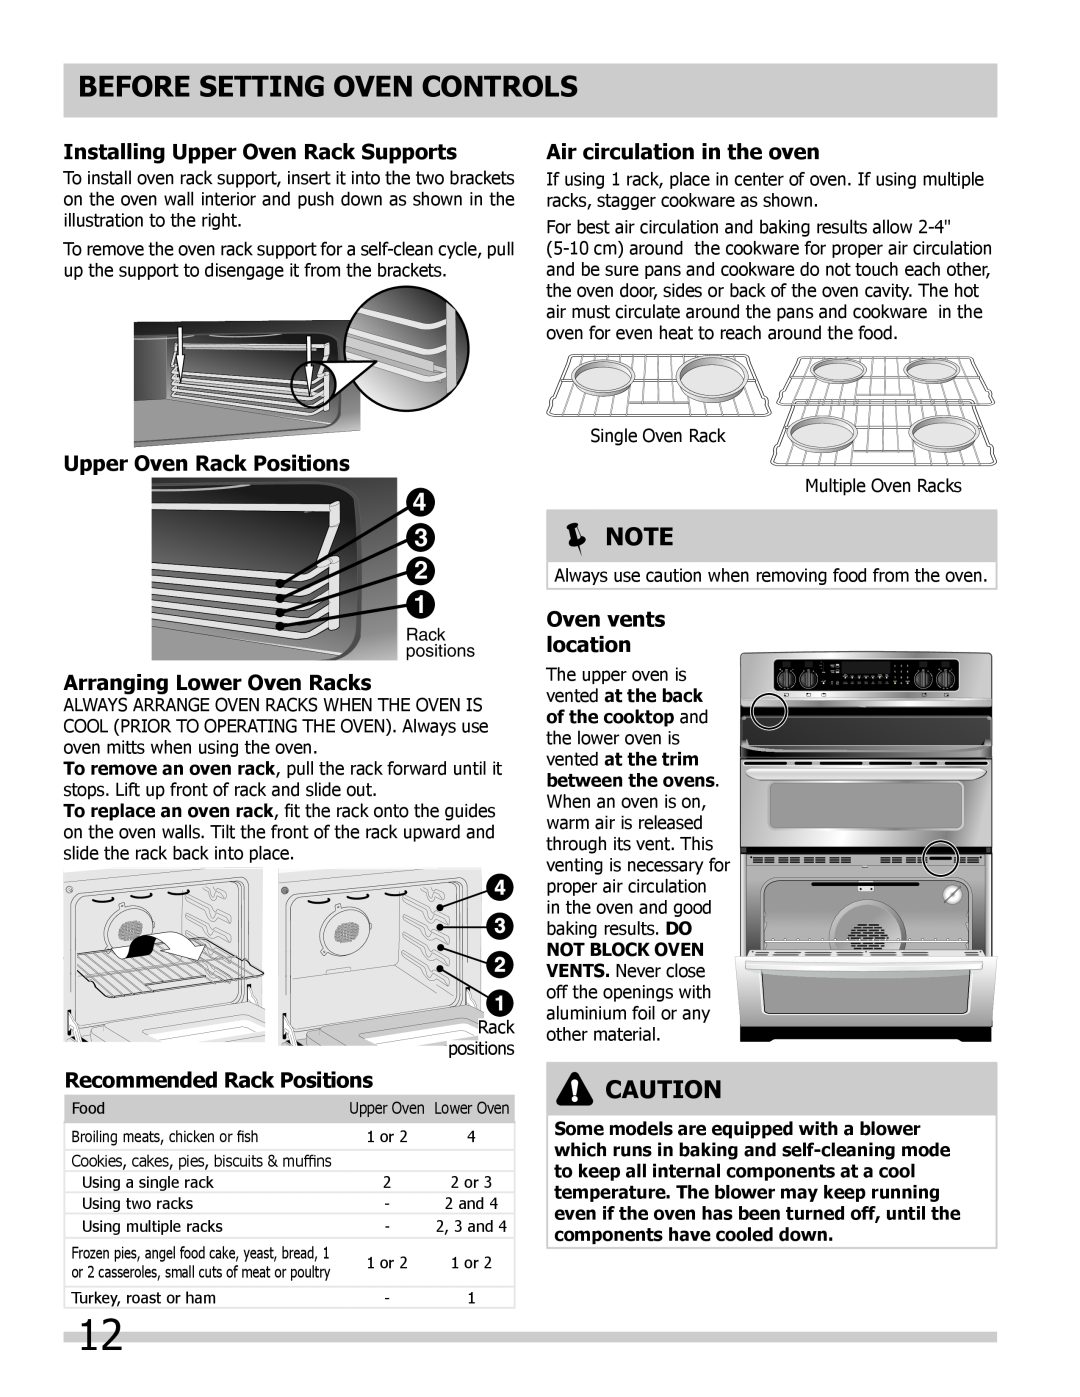 Frigidaire 318205205 Before Setting Oven Controls, Installing Upper Oven Rack Supports, Upper Oven Rack Positions,  Note 